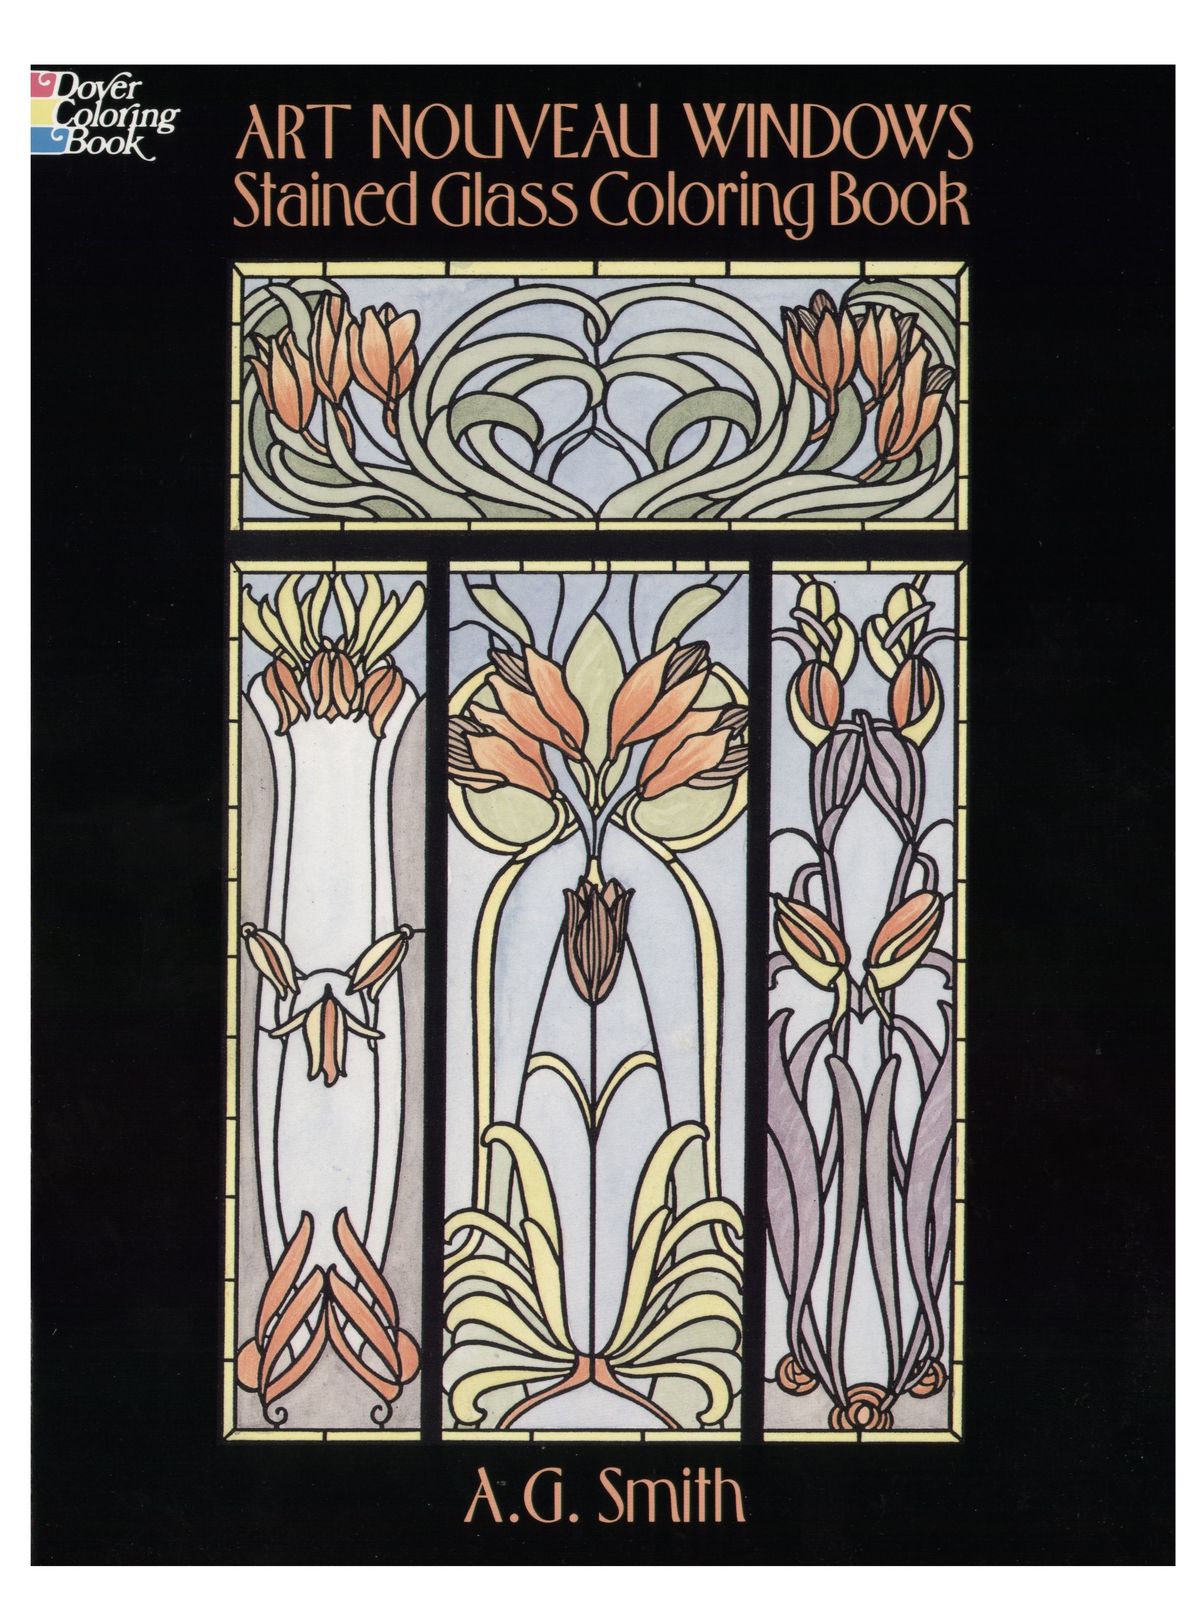 Art Nouveau Windows Stained Glass Coloring Book Art Nouveau Windows Stained Glass Coloring Book